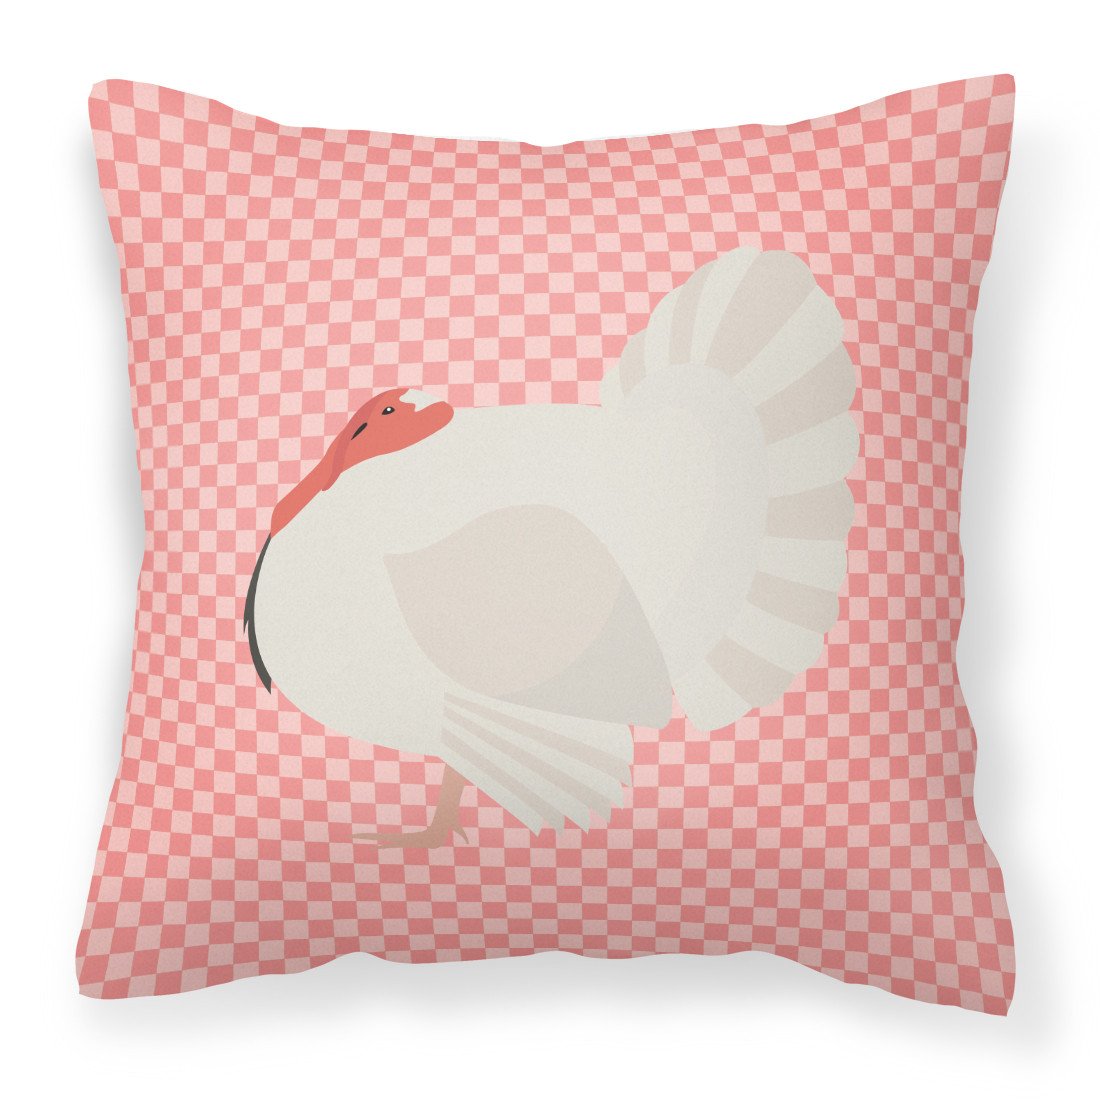 White Holland Turkey Pink Check Fabric Decorative Pillow BB7983PW1818 by Caroline's Treasures